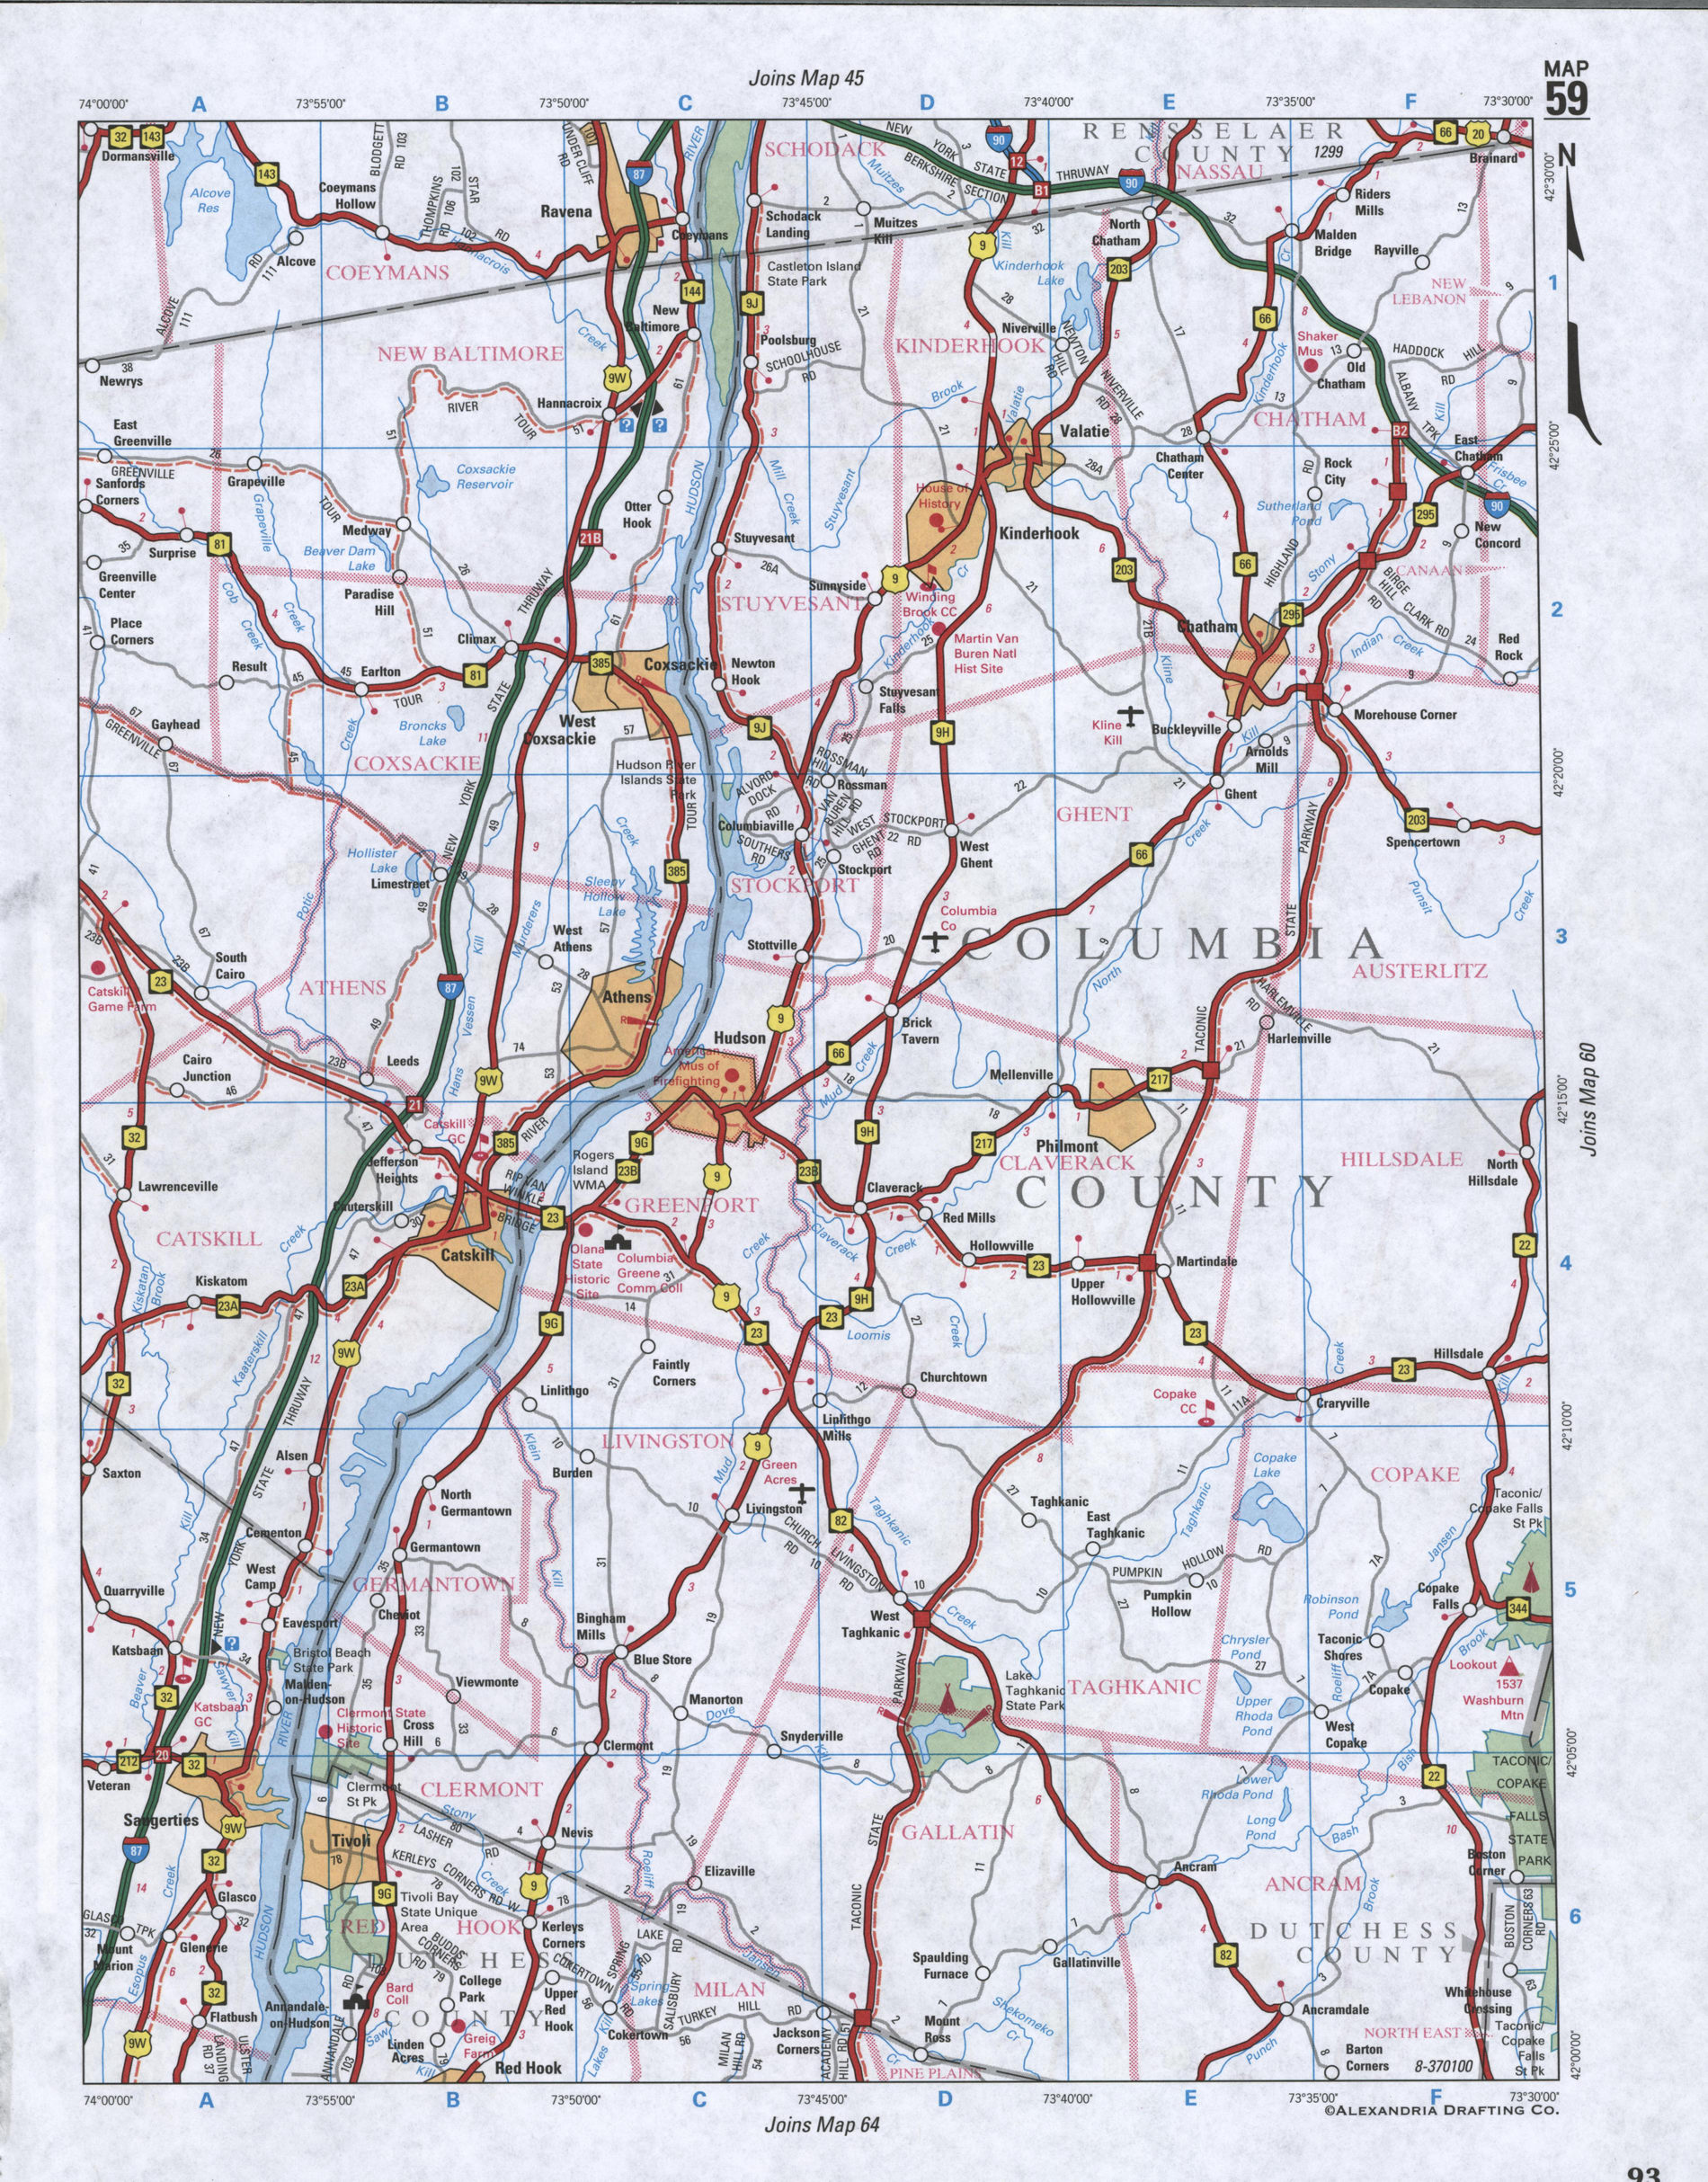 Map of Columbia County, New York state